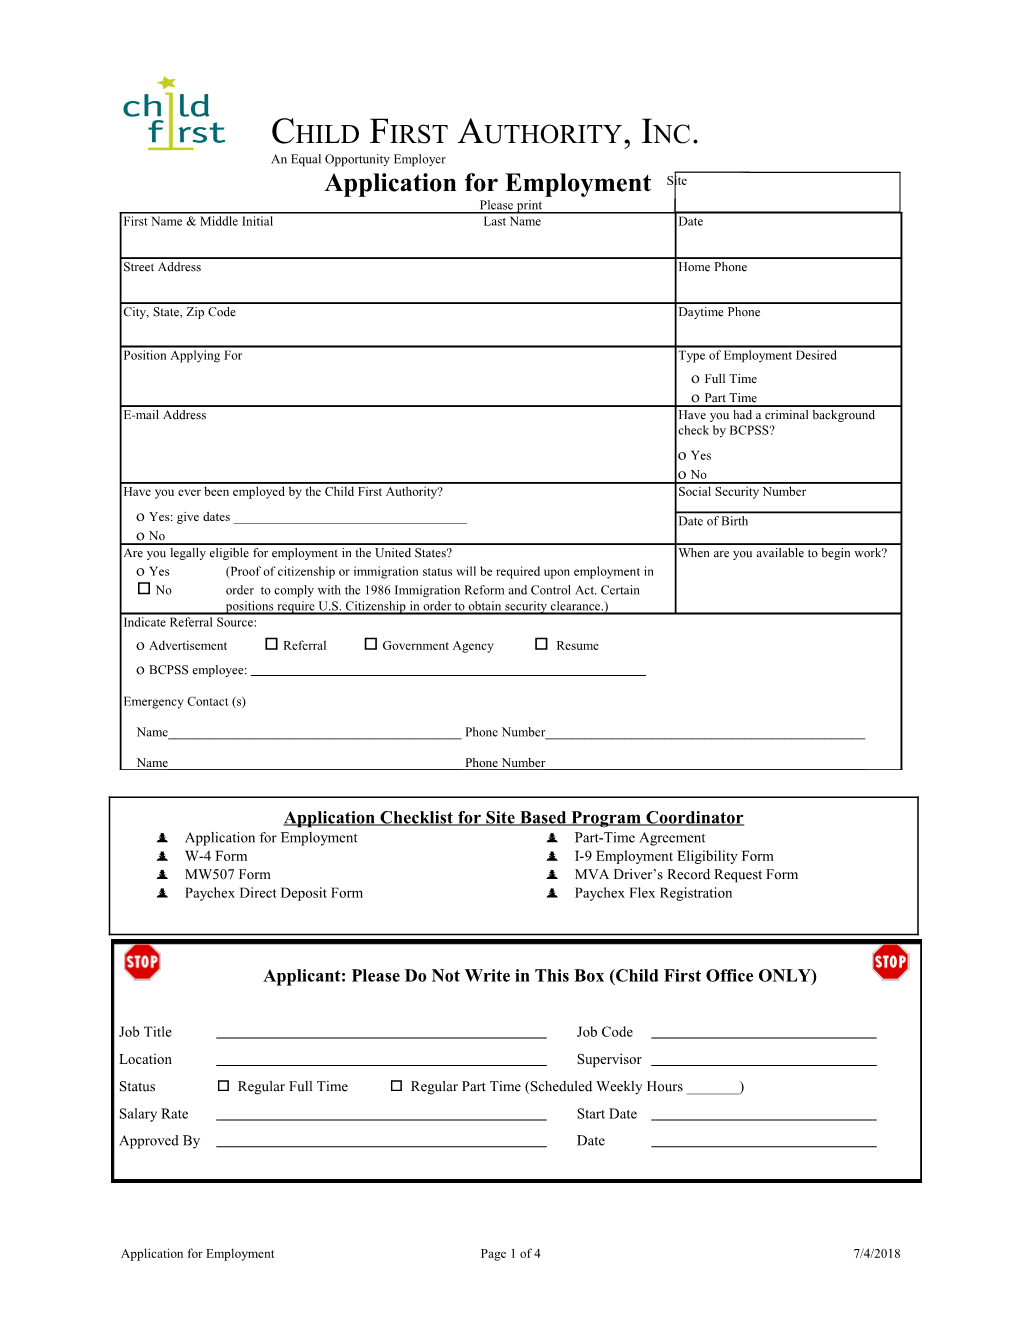 Application for Employment s98